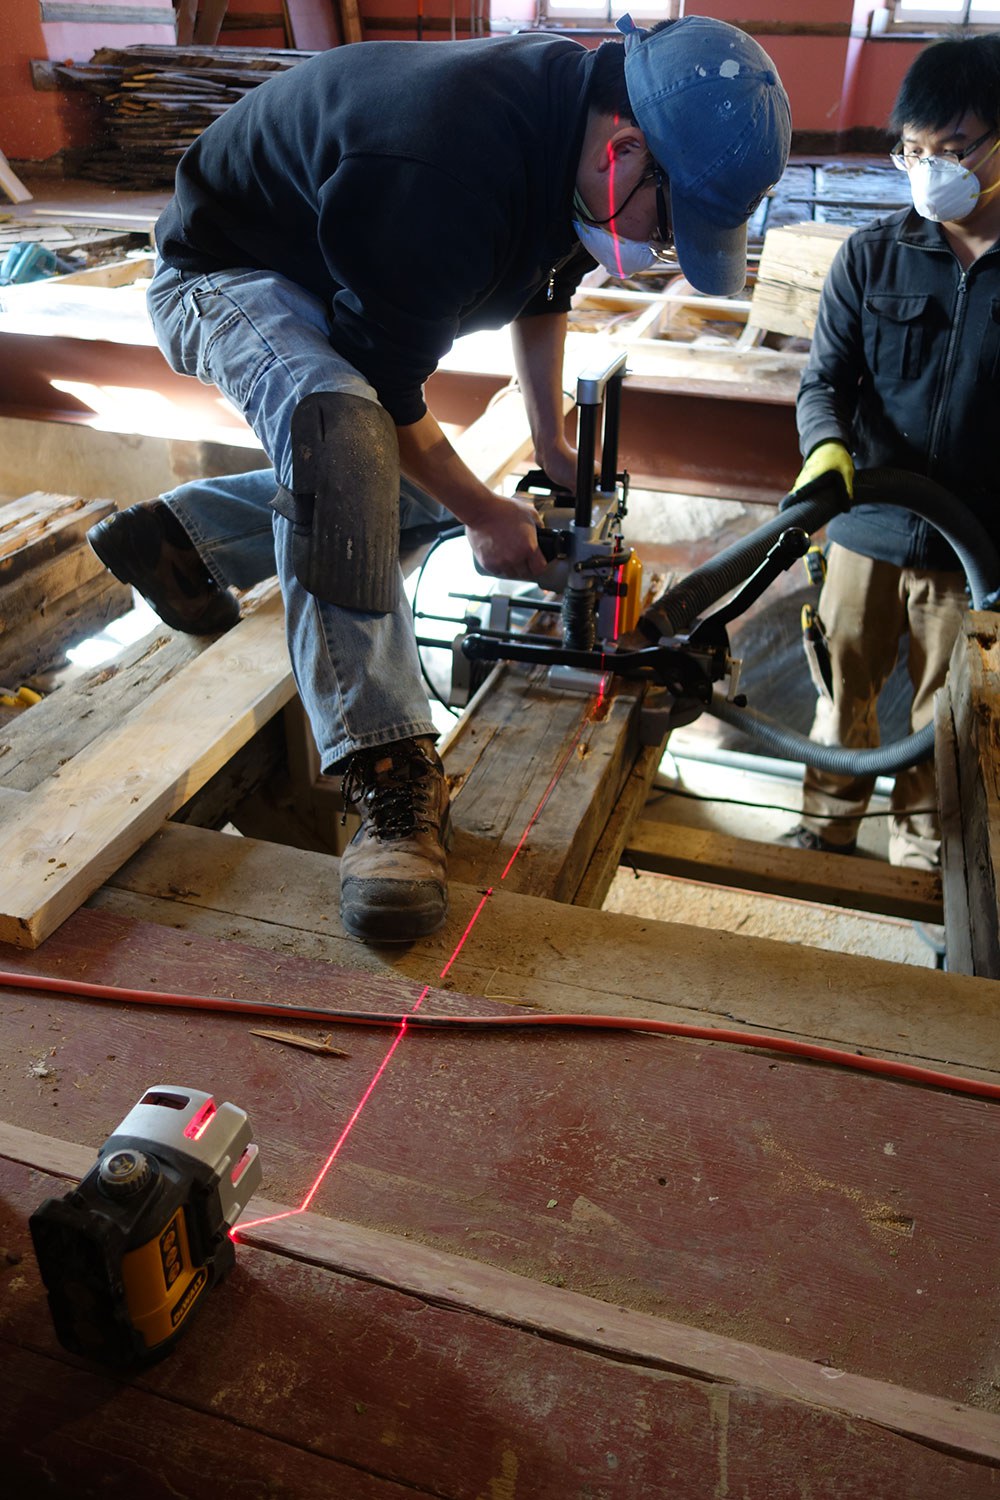 Routing out slots in old timbers using a precision guided electric chain router